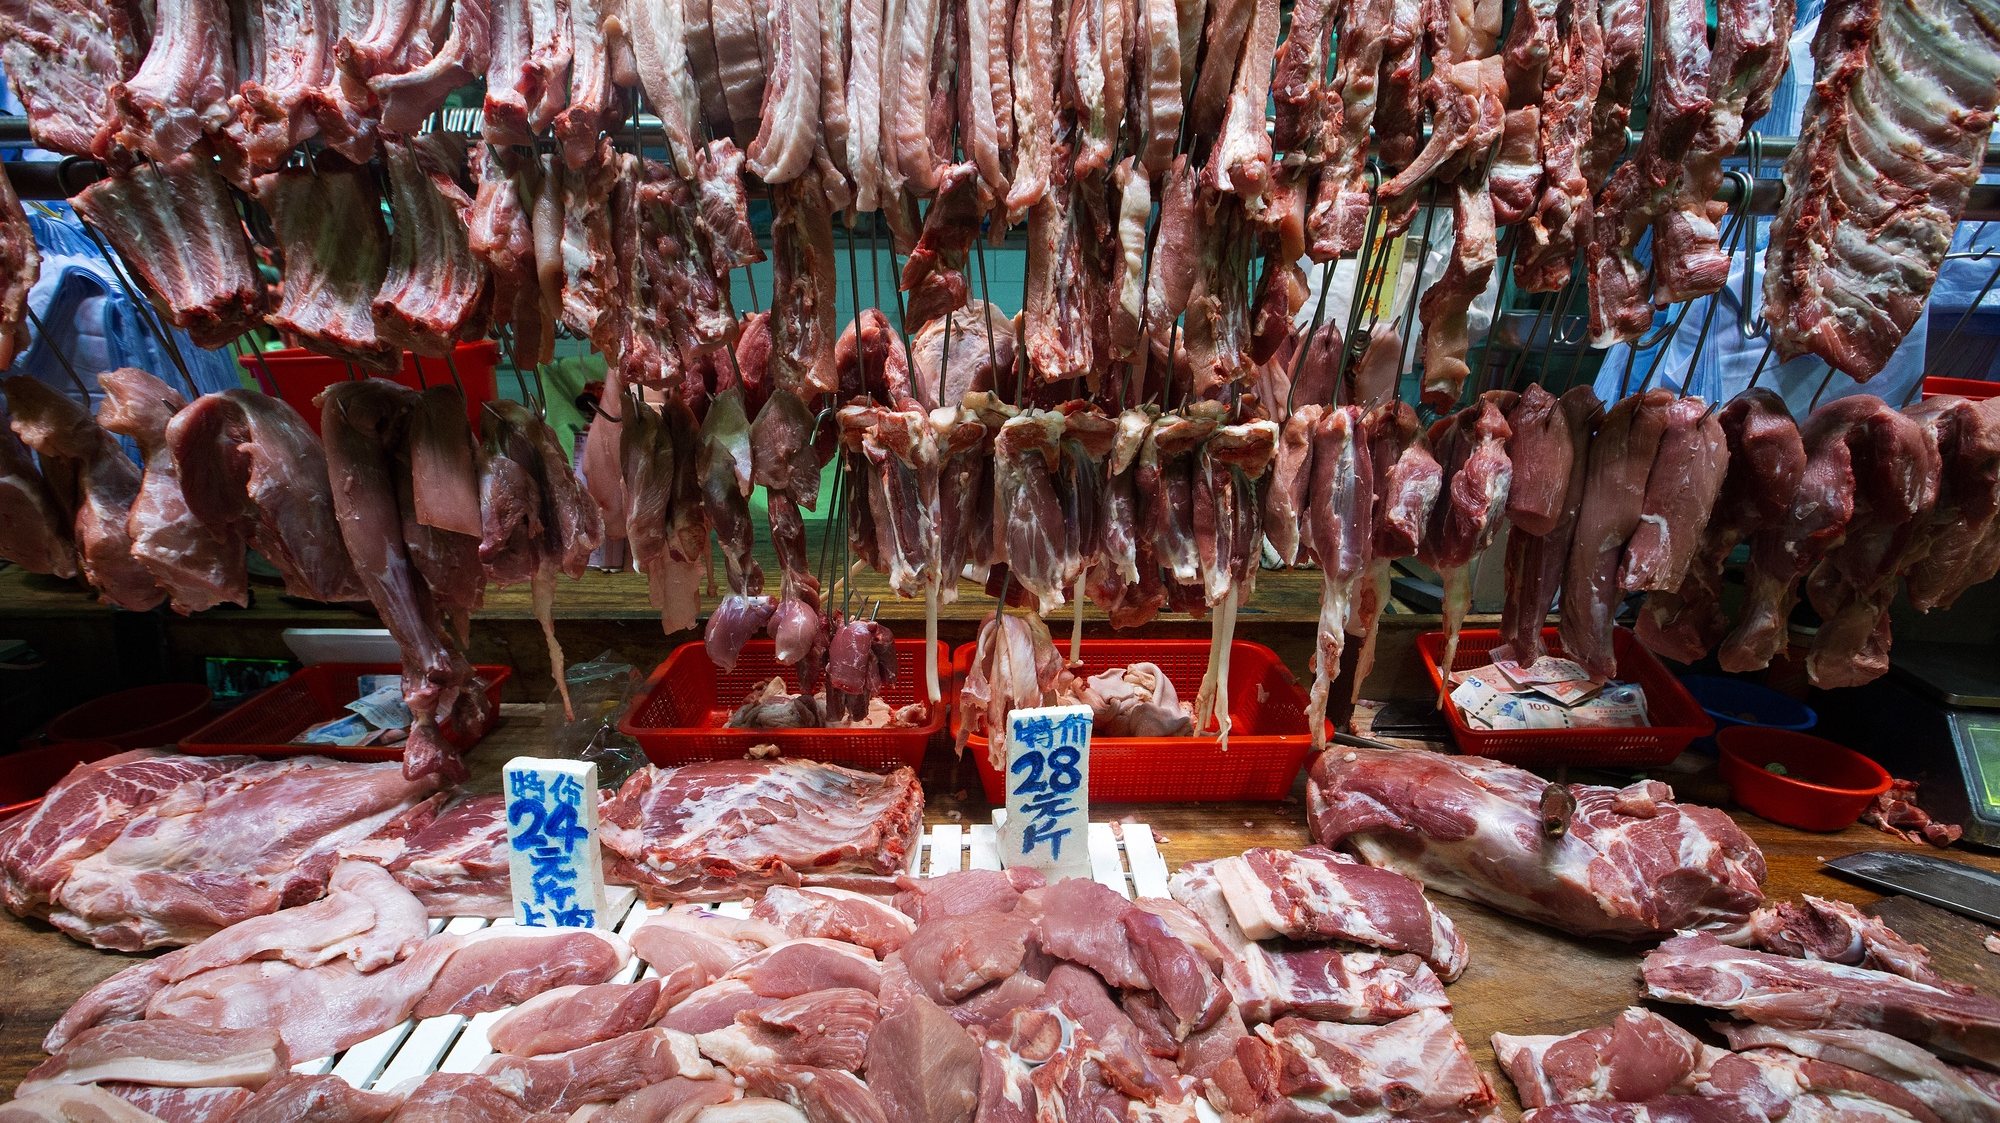 epa08663581 (FILE) - Pork meat is sold at a wet market in Tseung Kwan O, Hong Kong, China, 27 December 2018 (reissued 12 September 2020). China on 12 September 2020 said it had banned all imports of German pork meat following the discovery of first case of African Swine Fever in Germany. China is the biggest importer of German pork meat.  EPA/ALEX HOFFORD *** Local Caption *** 54861842